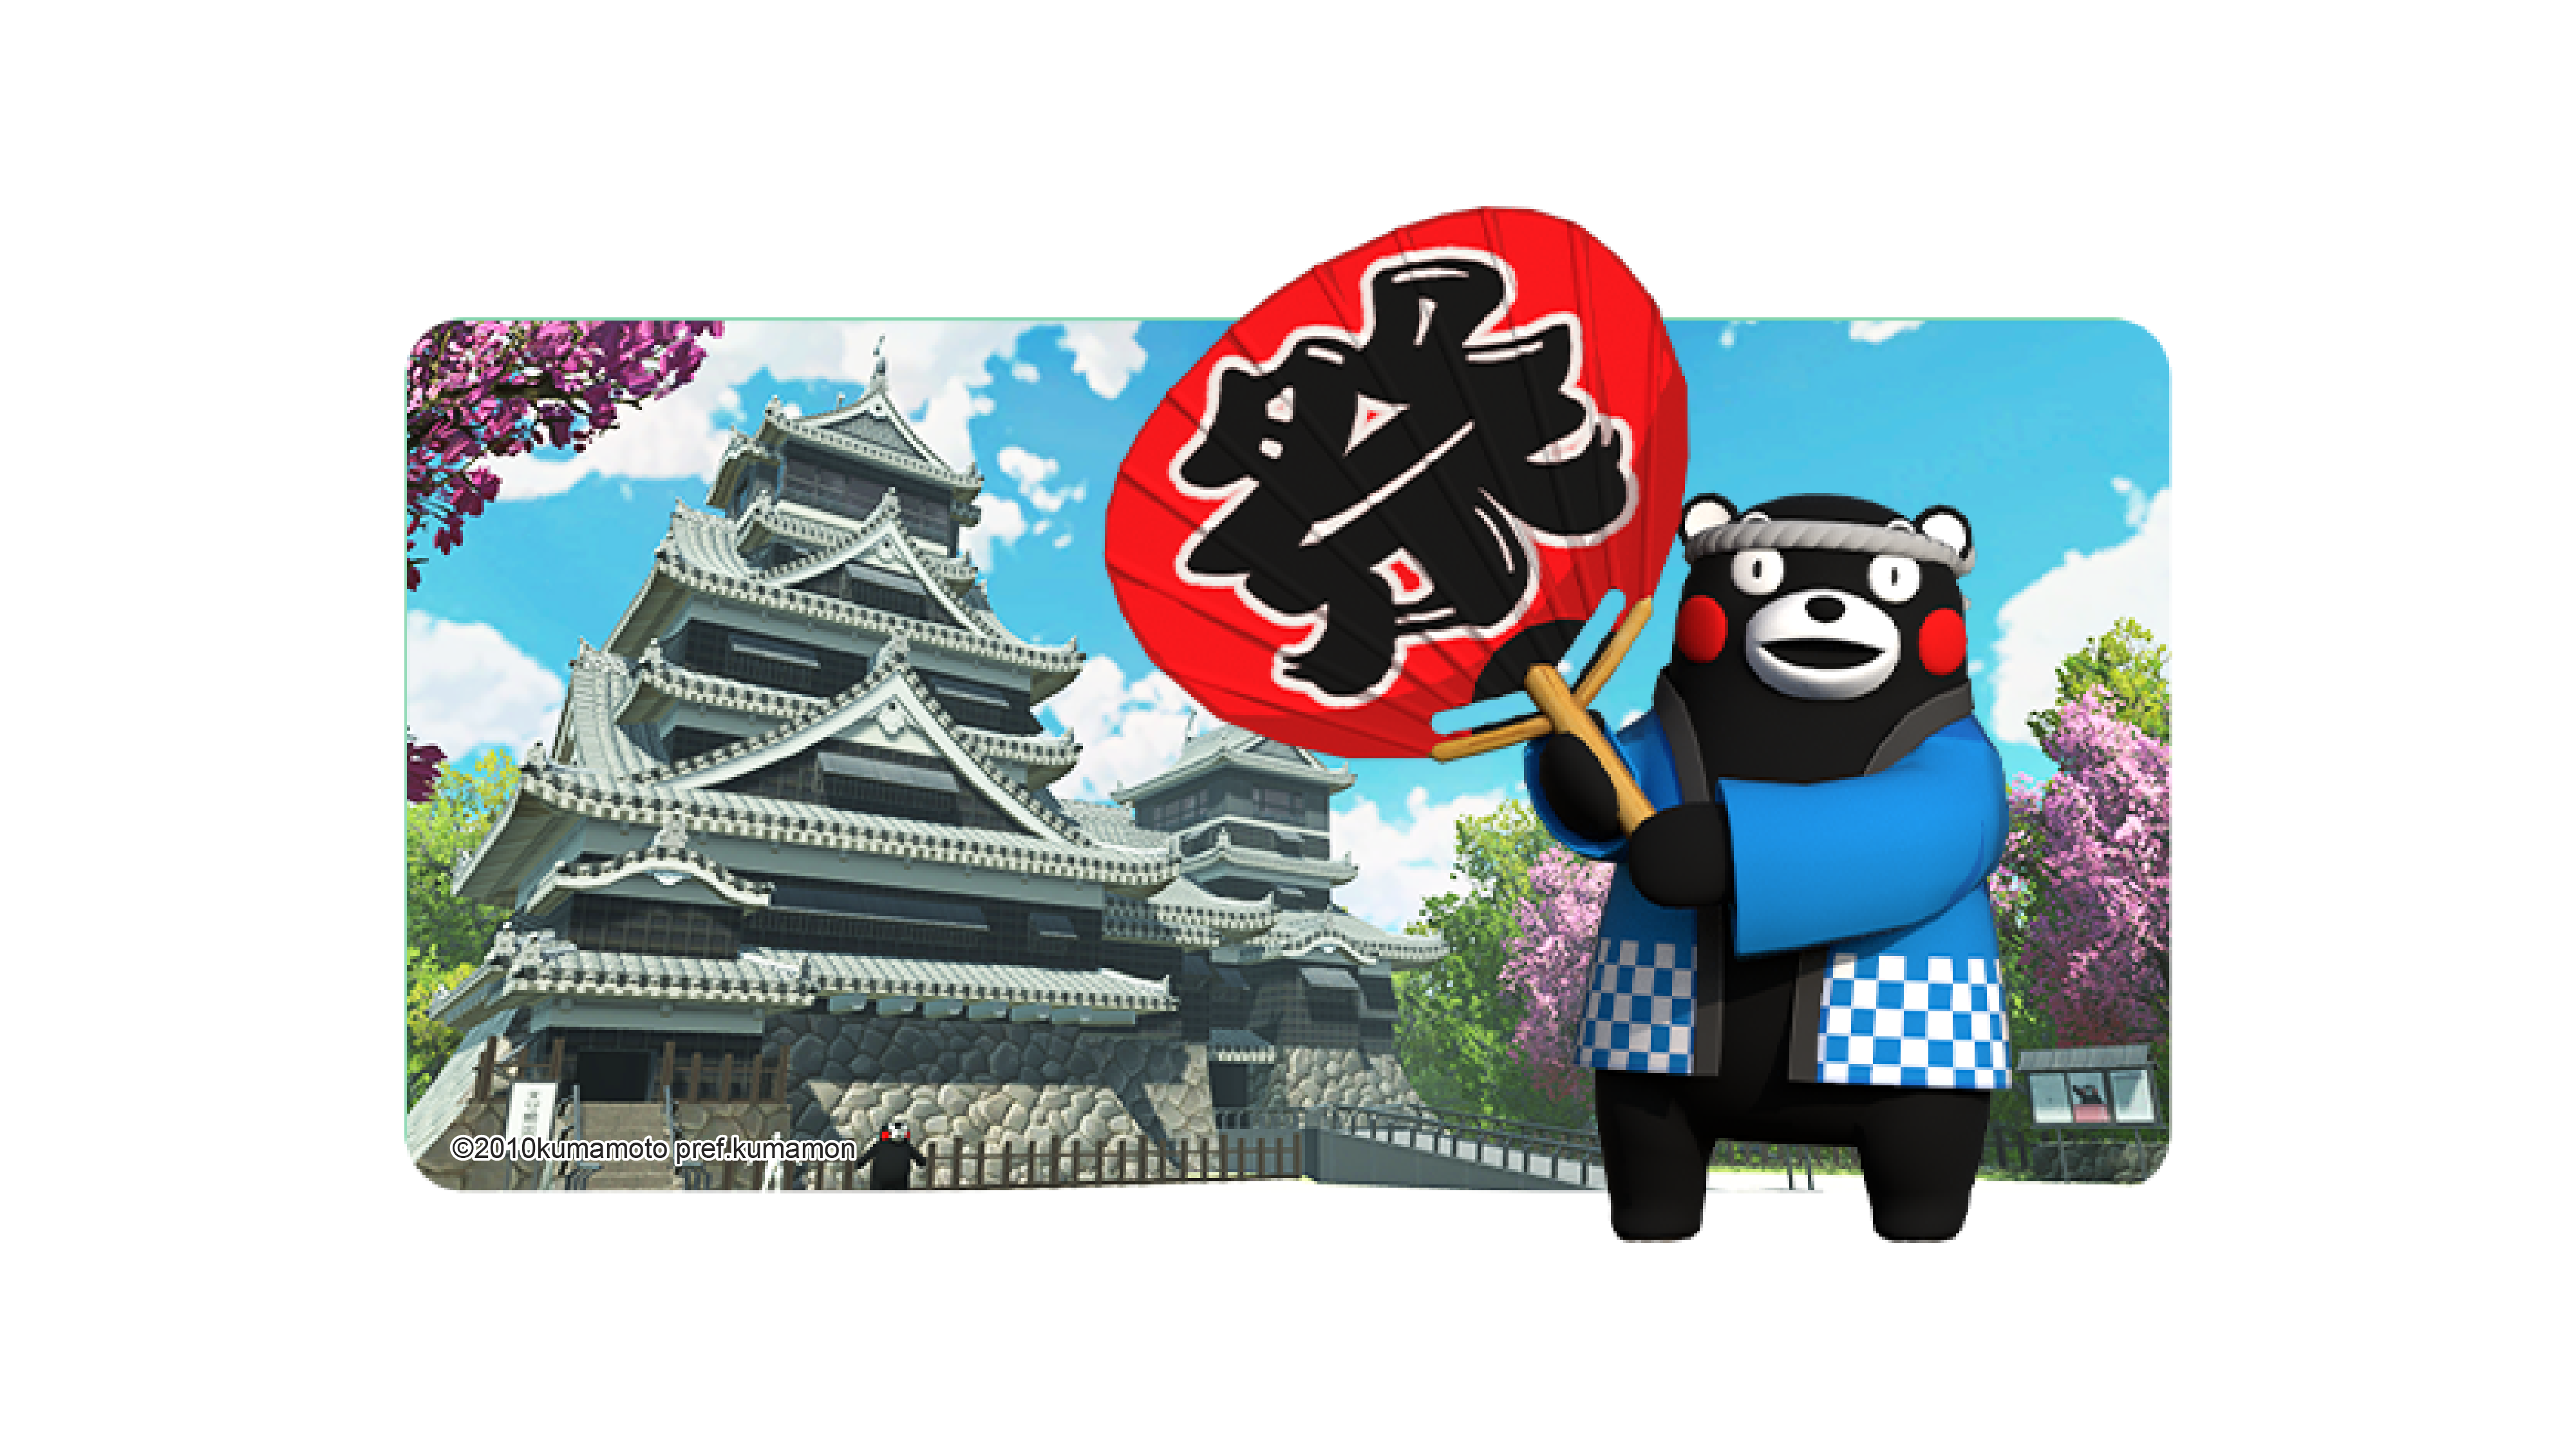 Kumamon Land is fully authorized by Japan, and is exclusively available at VEXMETA to create a new immersive traveling experience through ground-breaking integration between classic tourism and advanced metaverse technology.